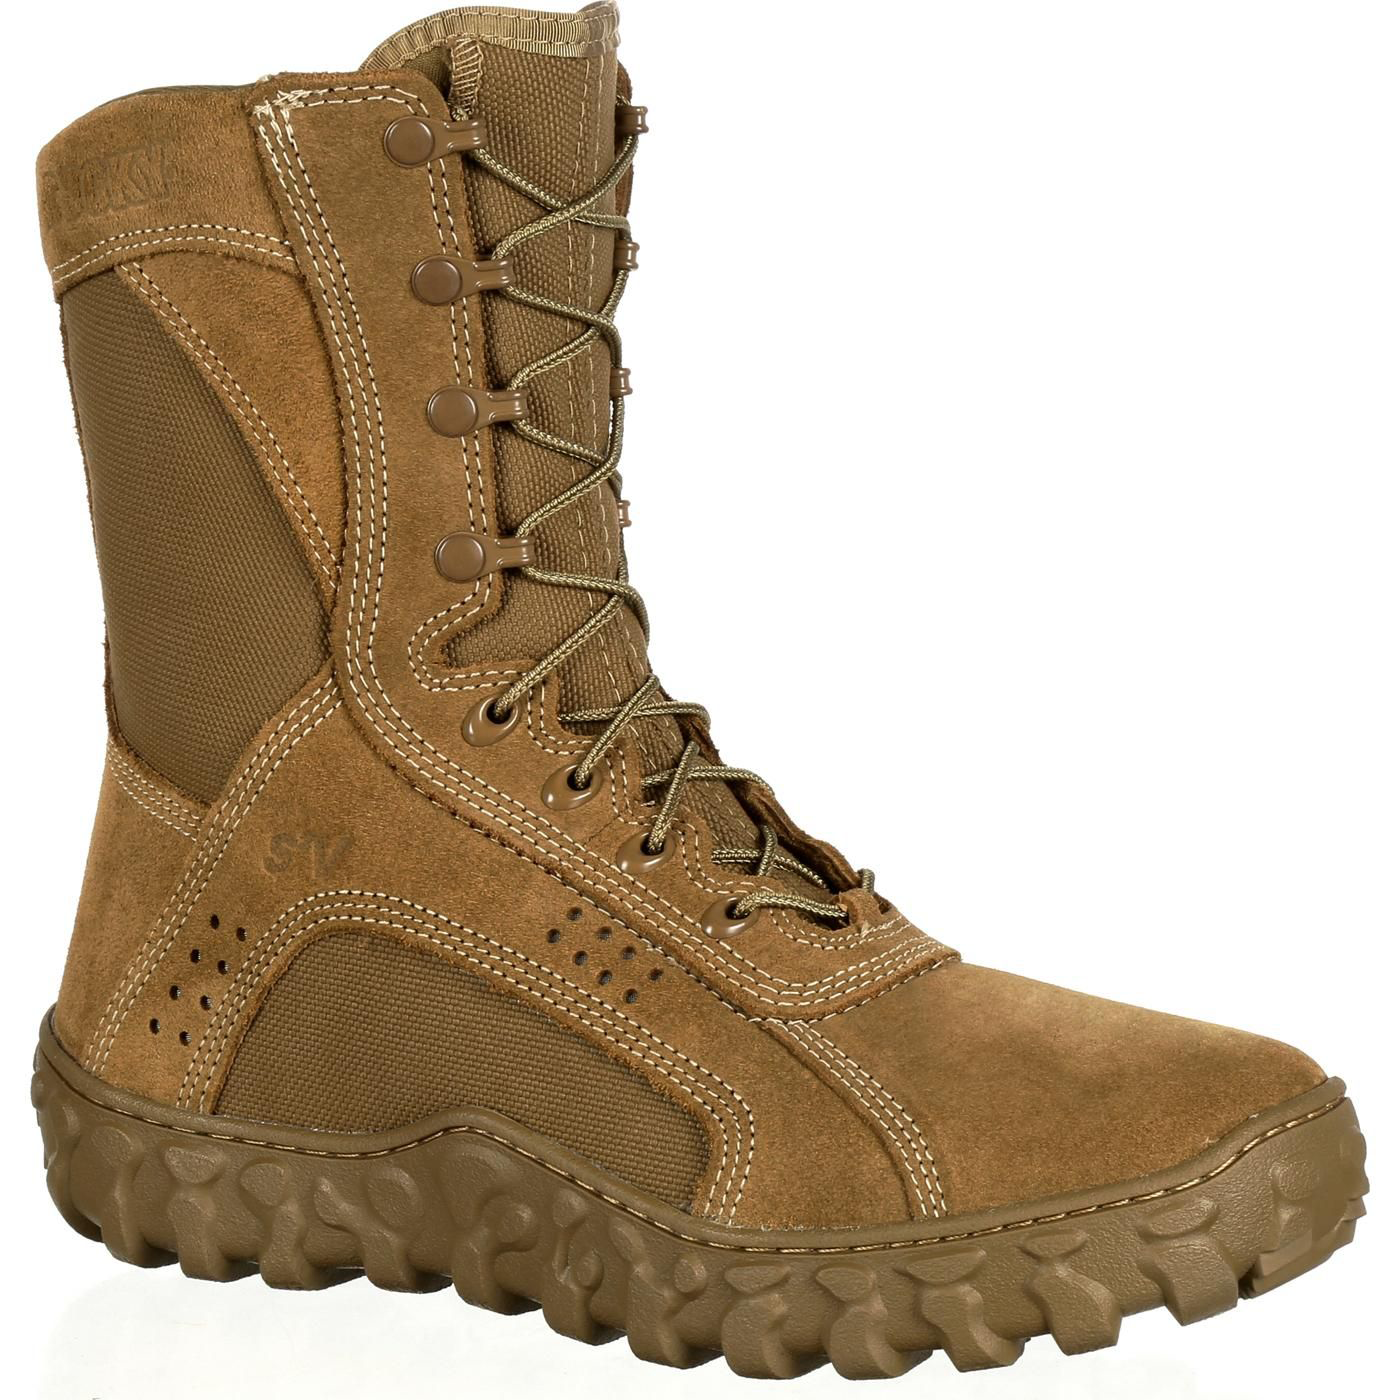 Rocky S2V Tactical Military Boots for Men - Coyote Brown - 9.5M